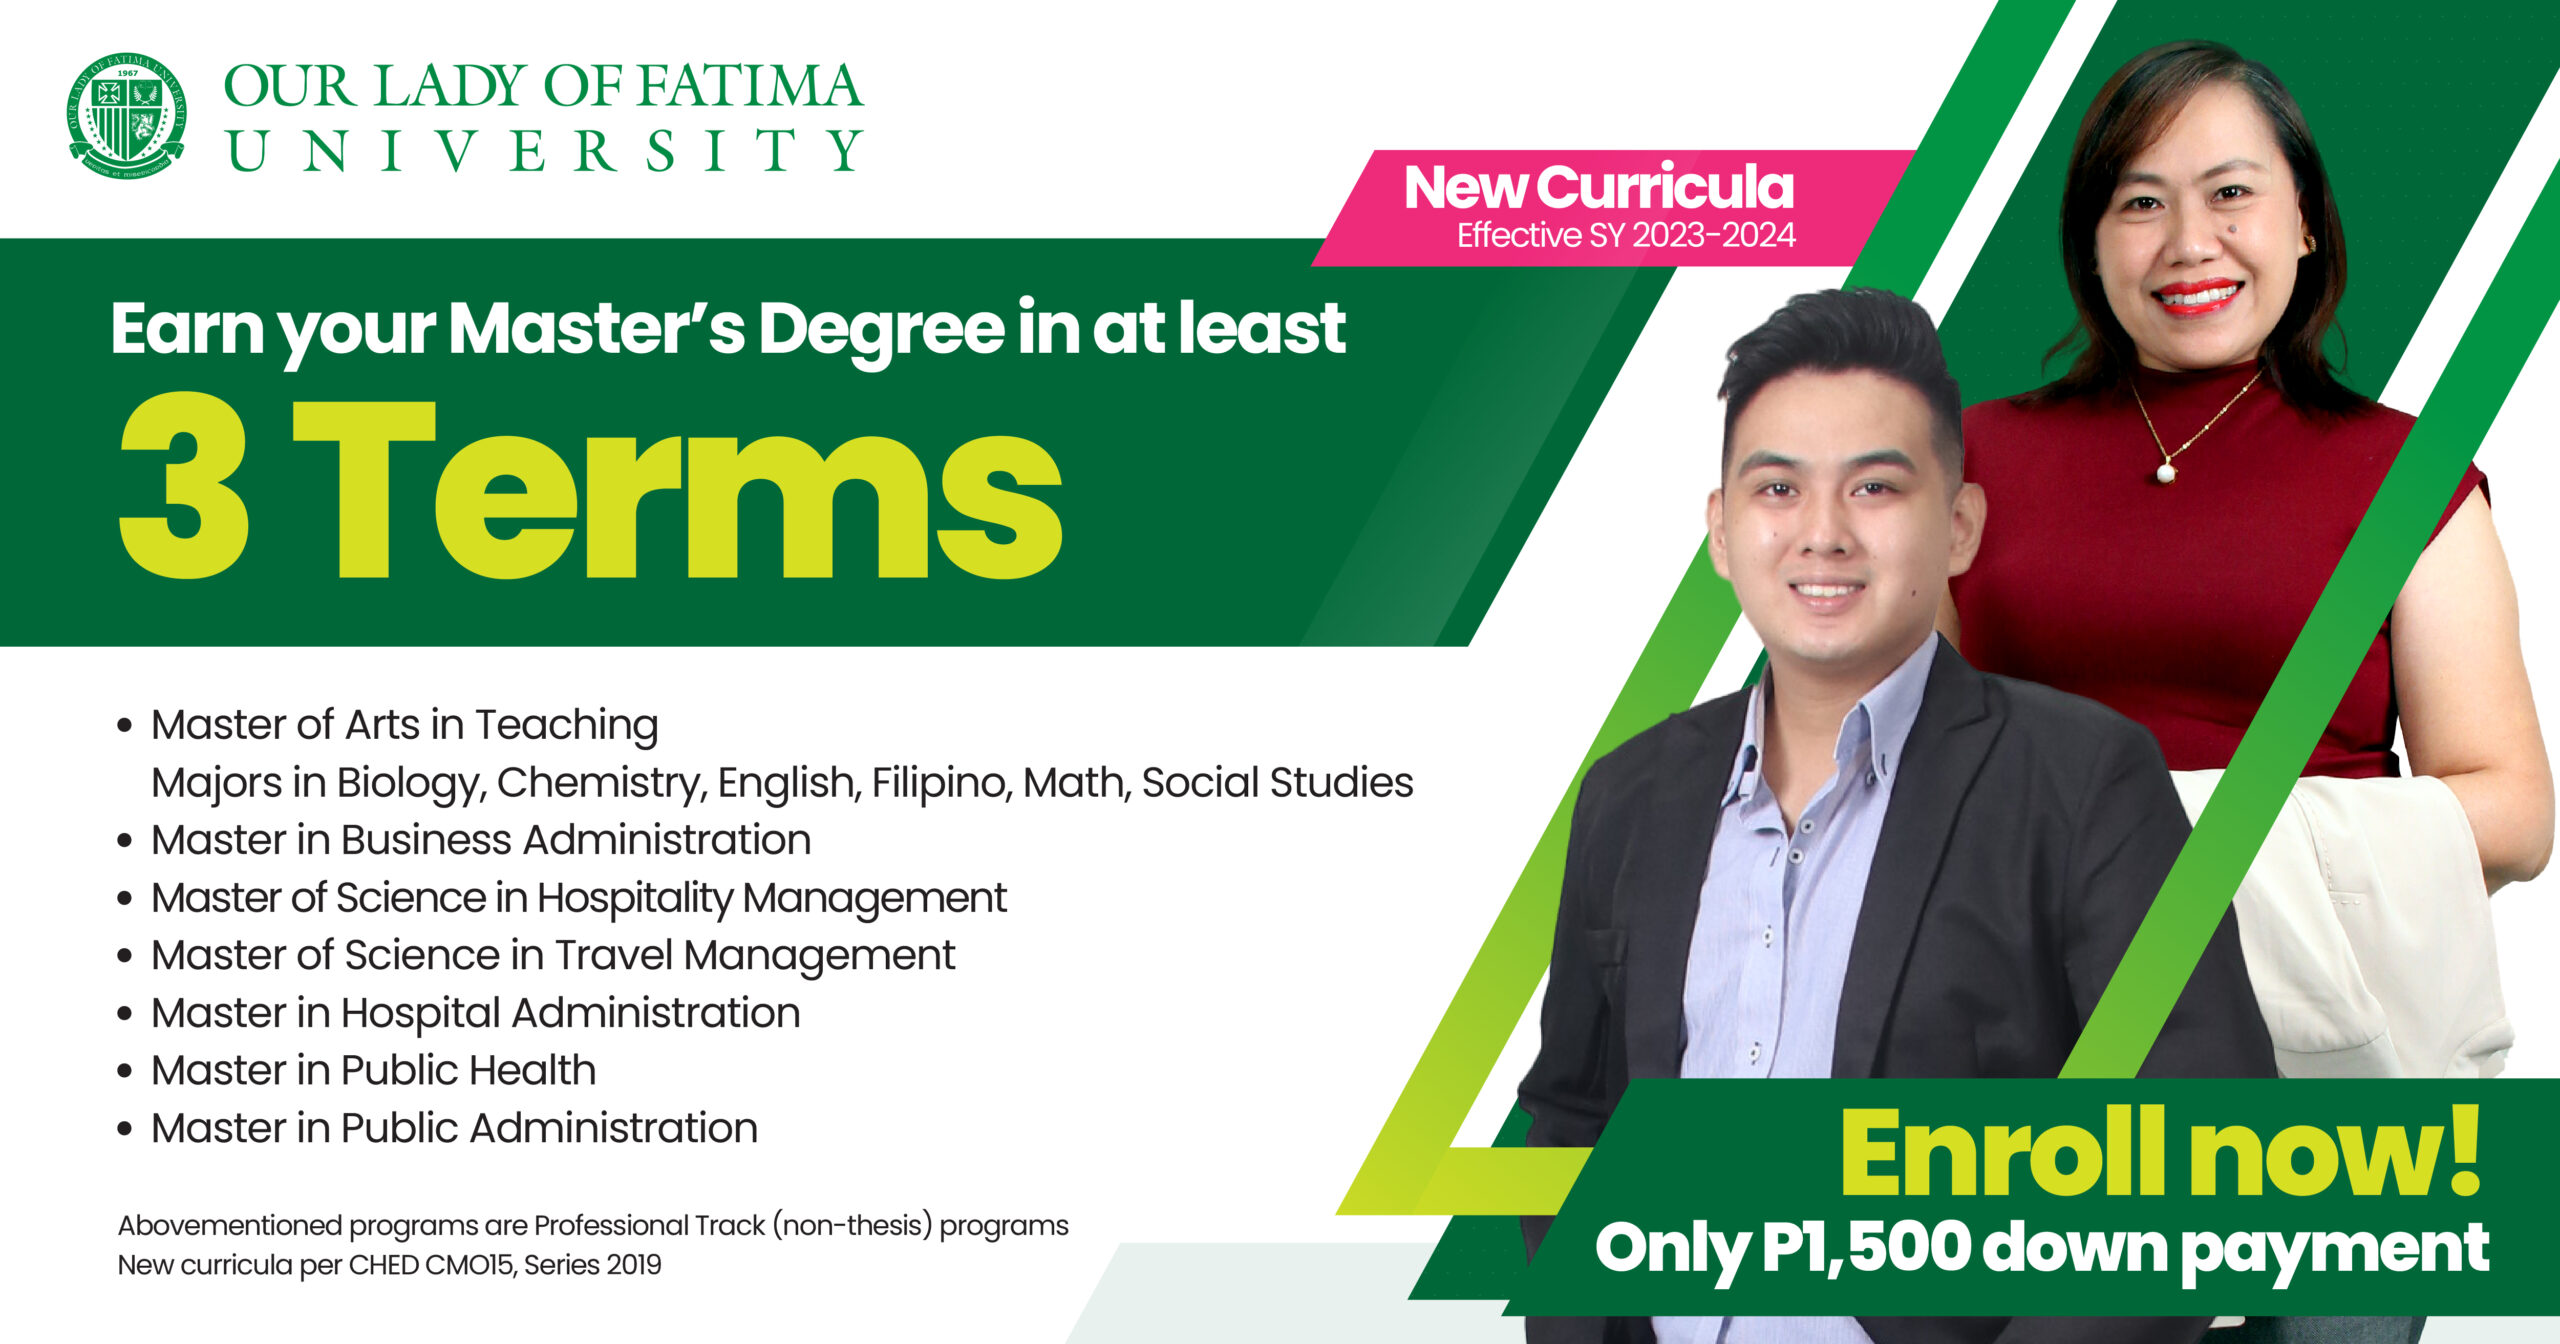 OLFU now offers master’s degree programs achievable in at least 3 terms